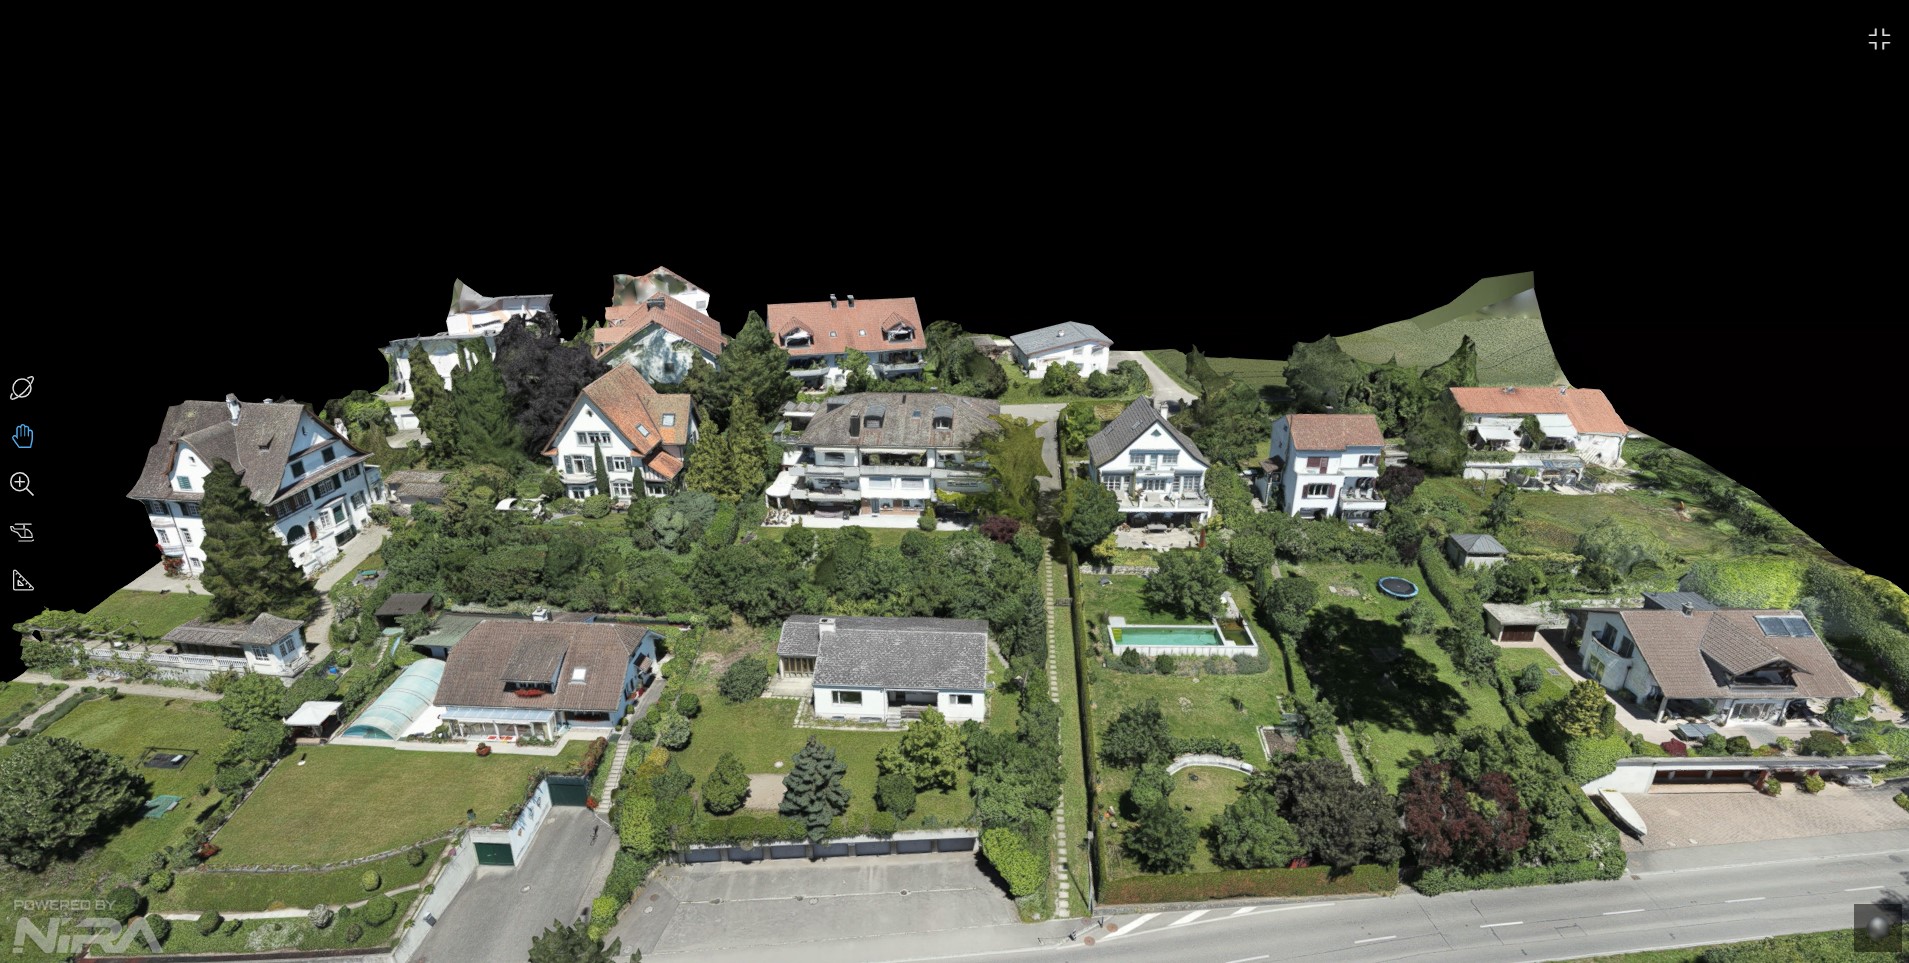 Nomoko's 3D services provide real estate professionals with accurate 3D representations of properties and neighborhoods